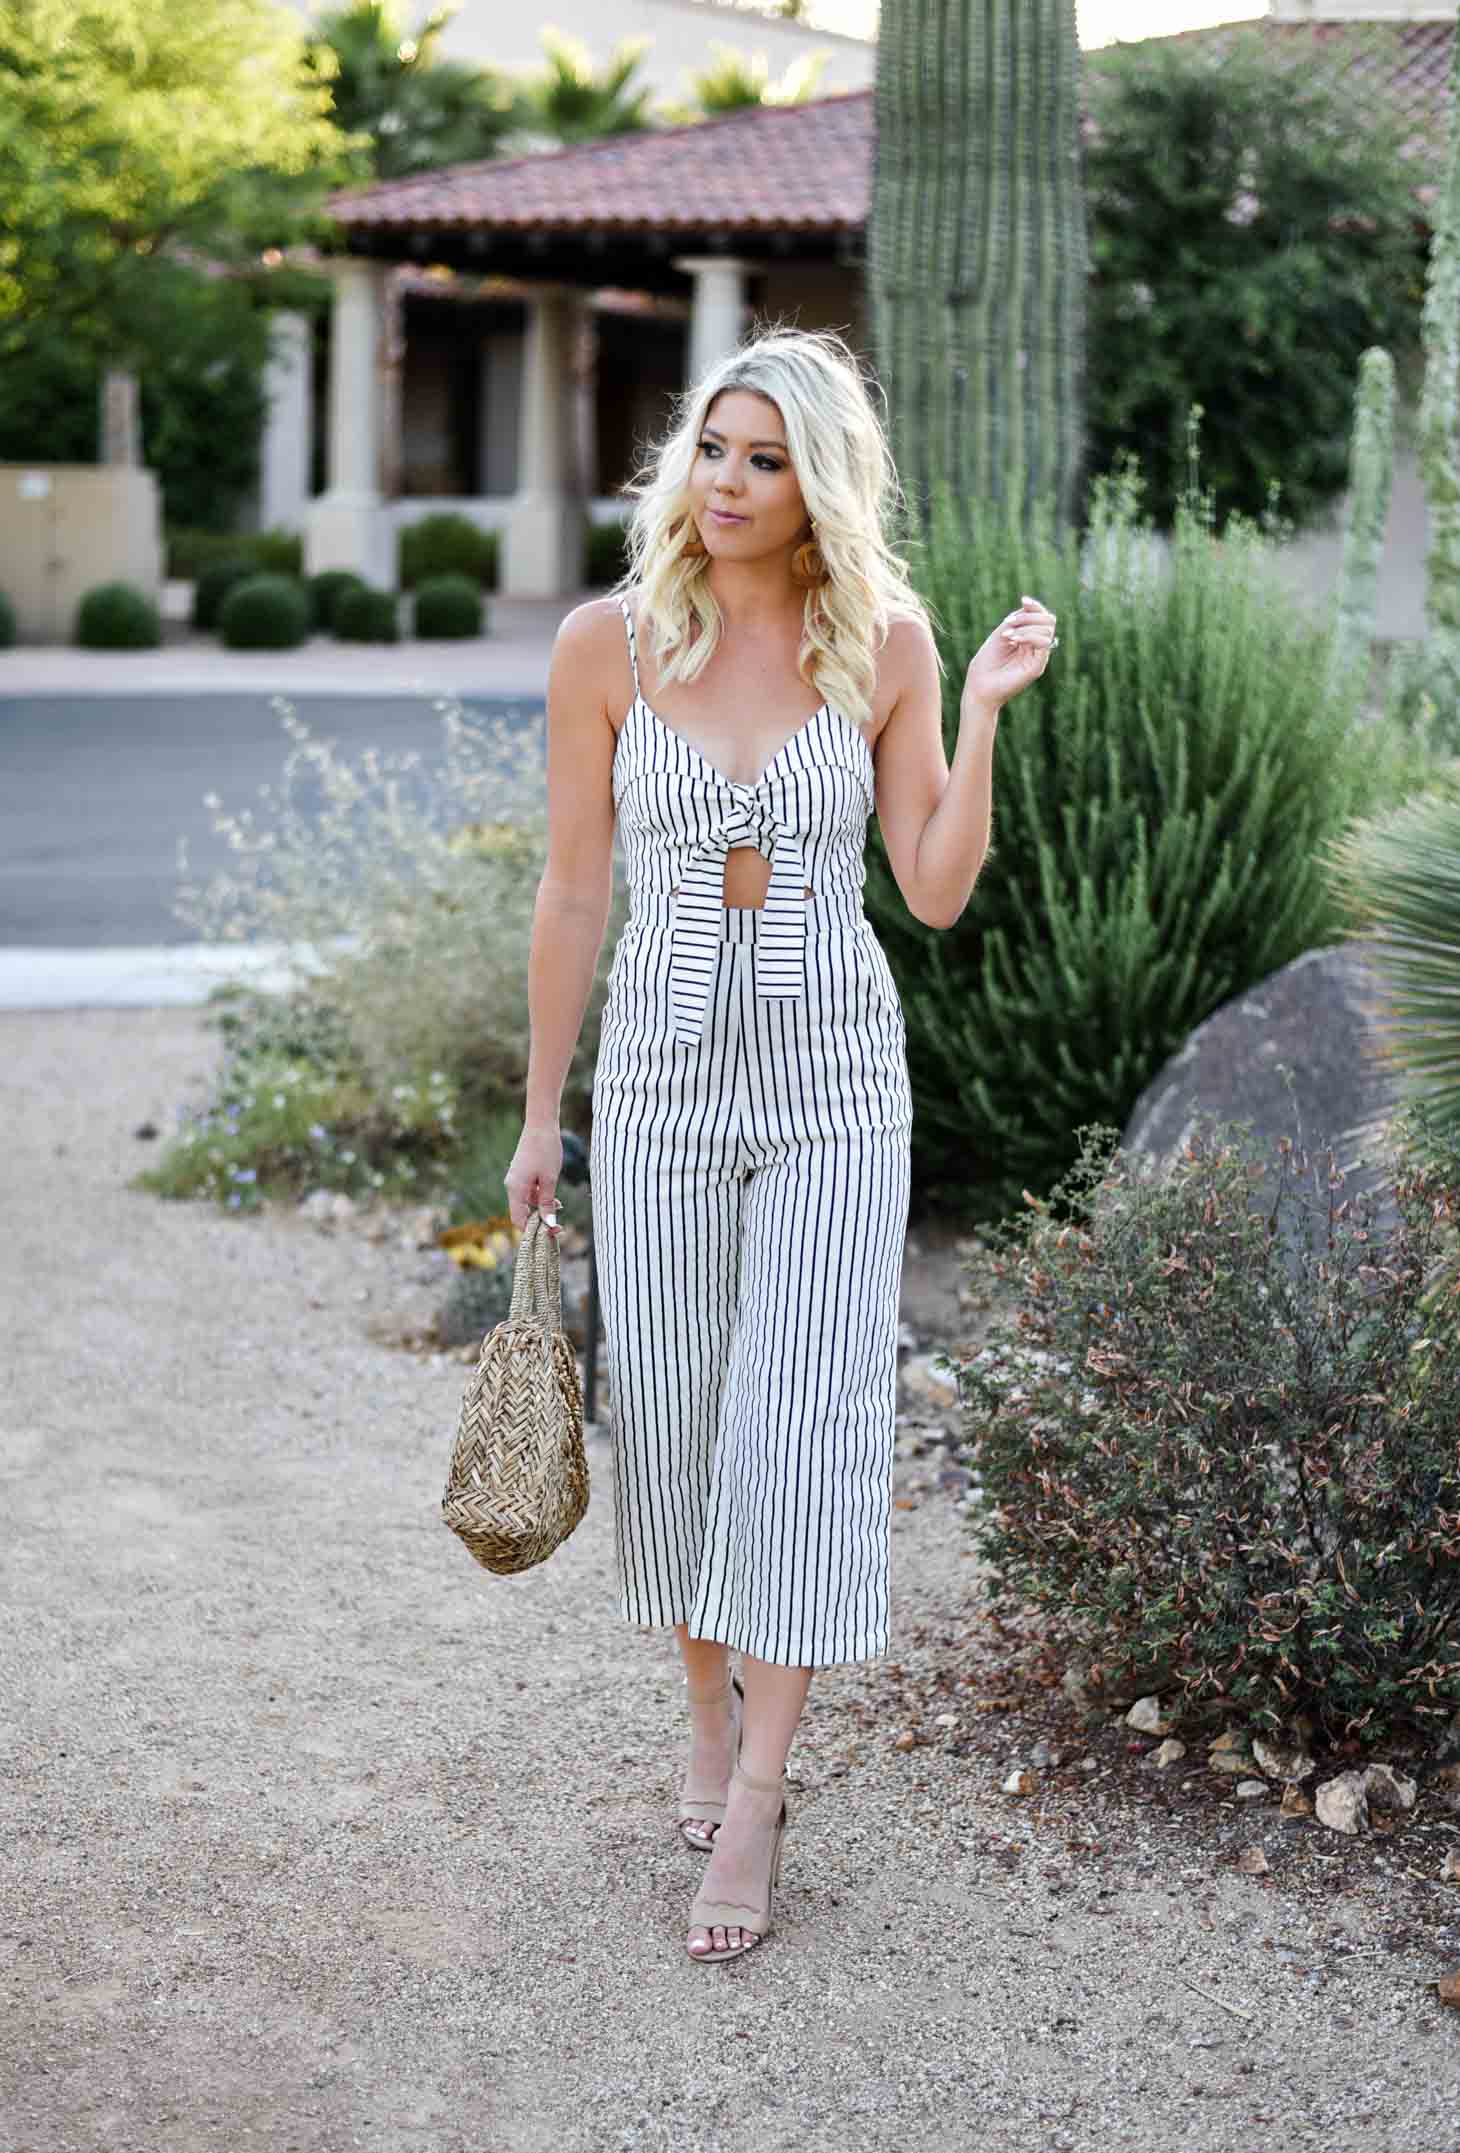 Erin Elizabeth of Wink and a Twirl shares this Mason Jar Boutique Striped Jumpsuit with cutout and tie detail for summer style 